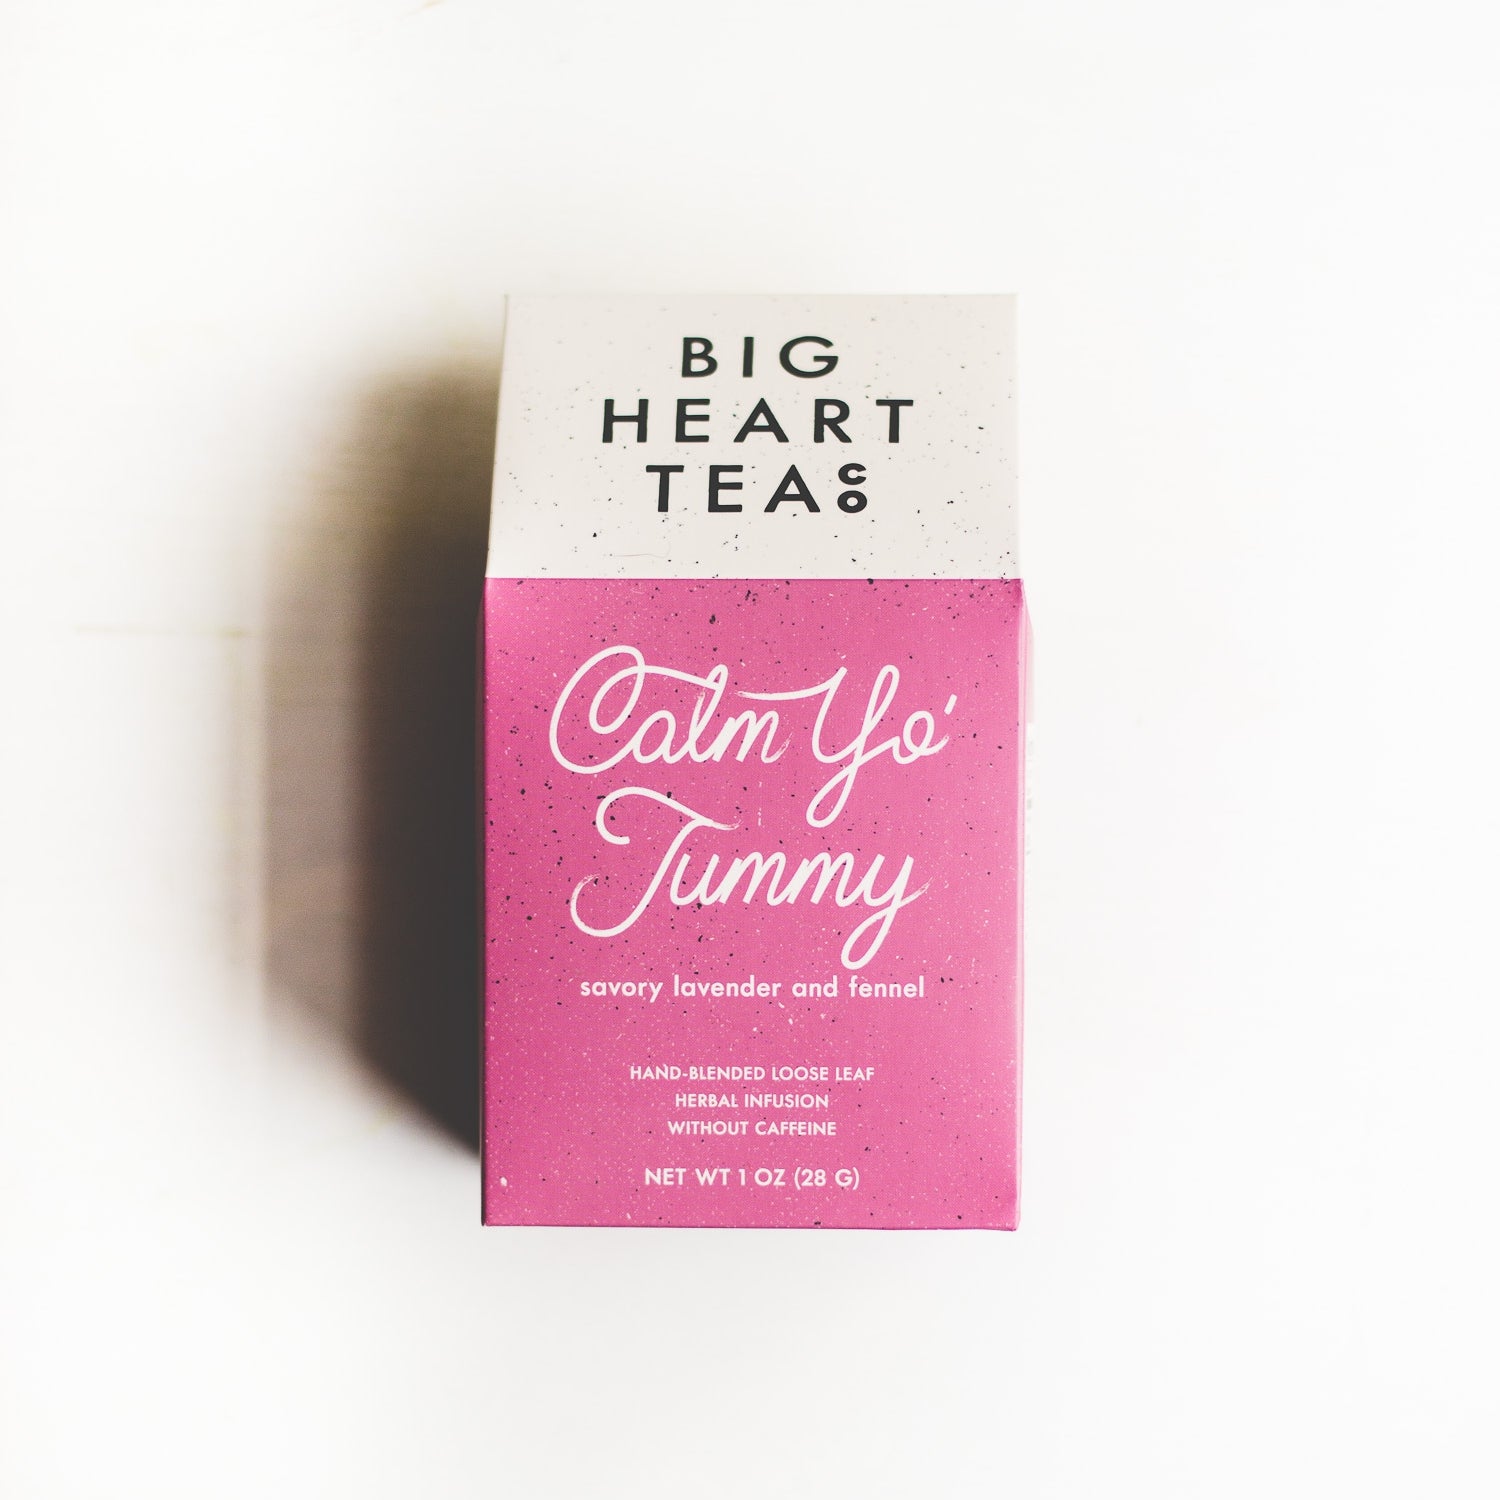 A pink box of Calm Yo' Tummy Tea, an organic blend featuring tulsi, lavender, fennel seed, and brahmi. Designed to stimulate digestion, soothe upset stomachs, relieve stress, and support lactation. Offers a balanced sweet and savory flavor profile.